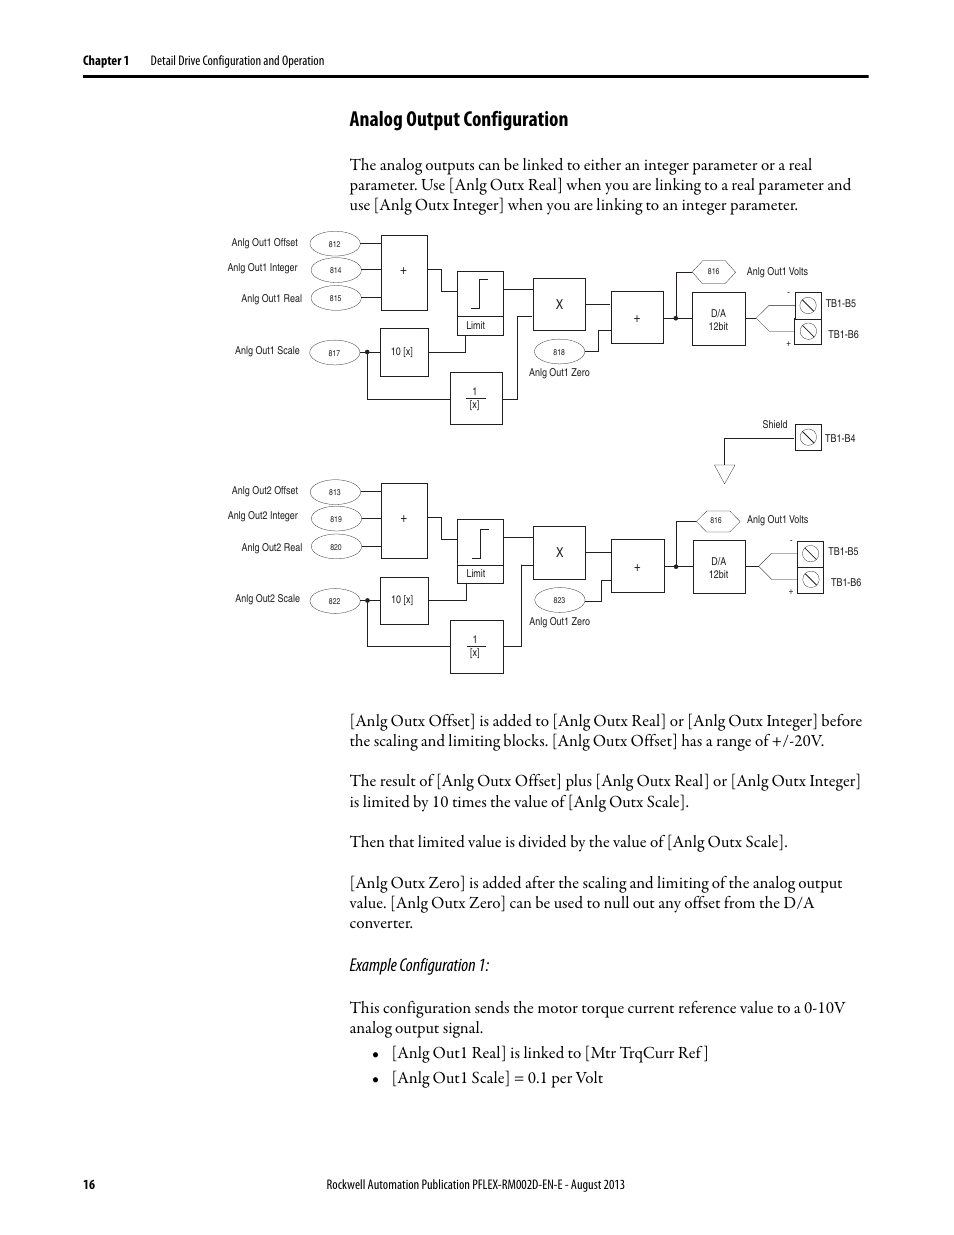 Analog output configuration, Example configuration 1 | Rockwell Automation 20D PowerFlex 700S with Phase I Control Reference Manual User Manual | Page 16 / 190